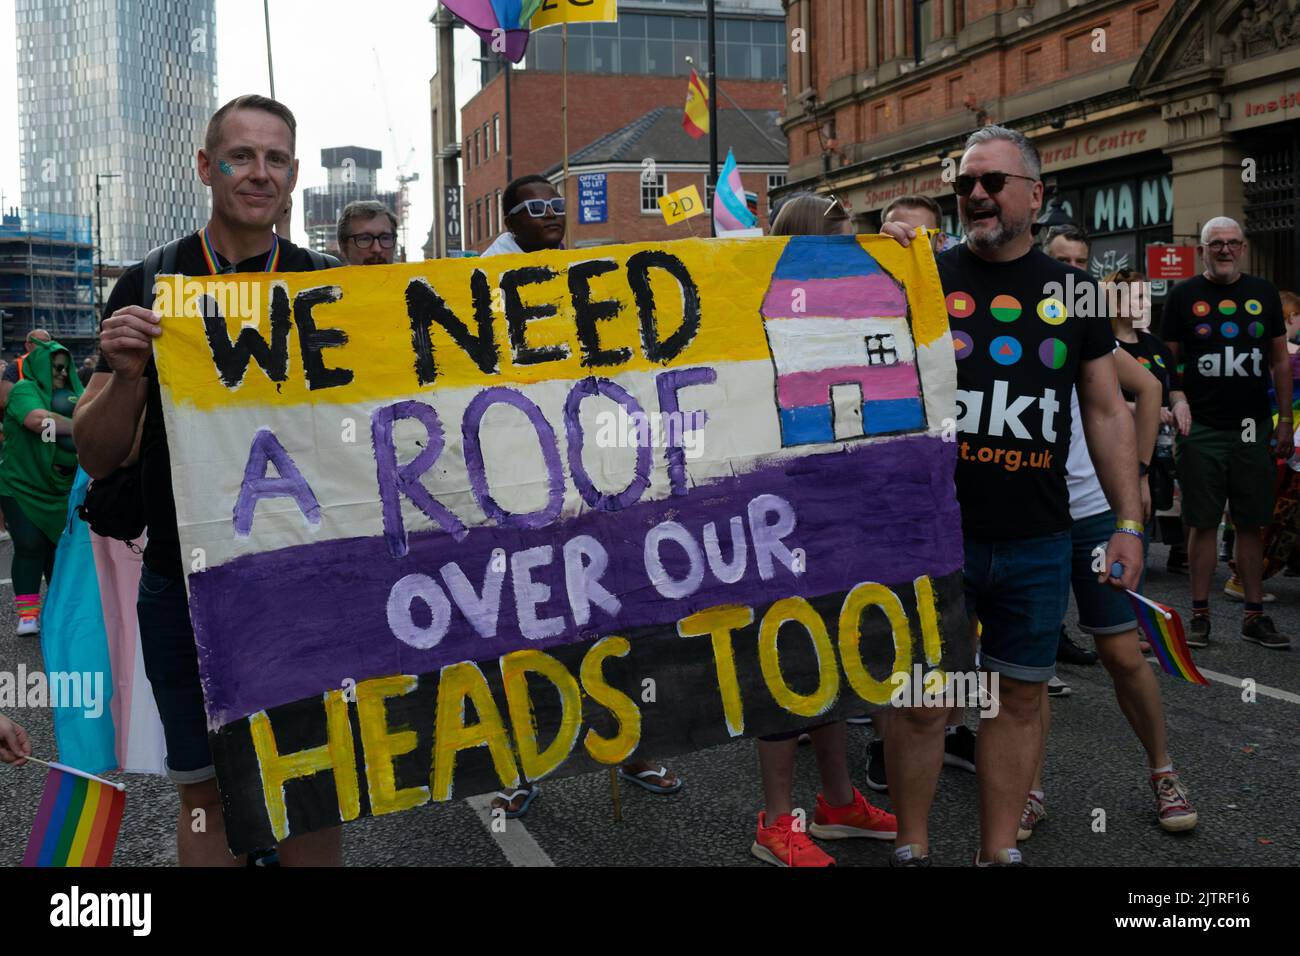 Manchester Pride parade. AKT homeless charity marching with banner text We Need a Roof over our Heads too. Theme March for Peace. Stock Photo